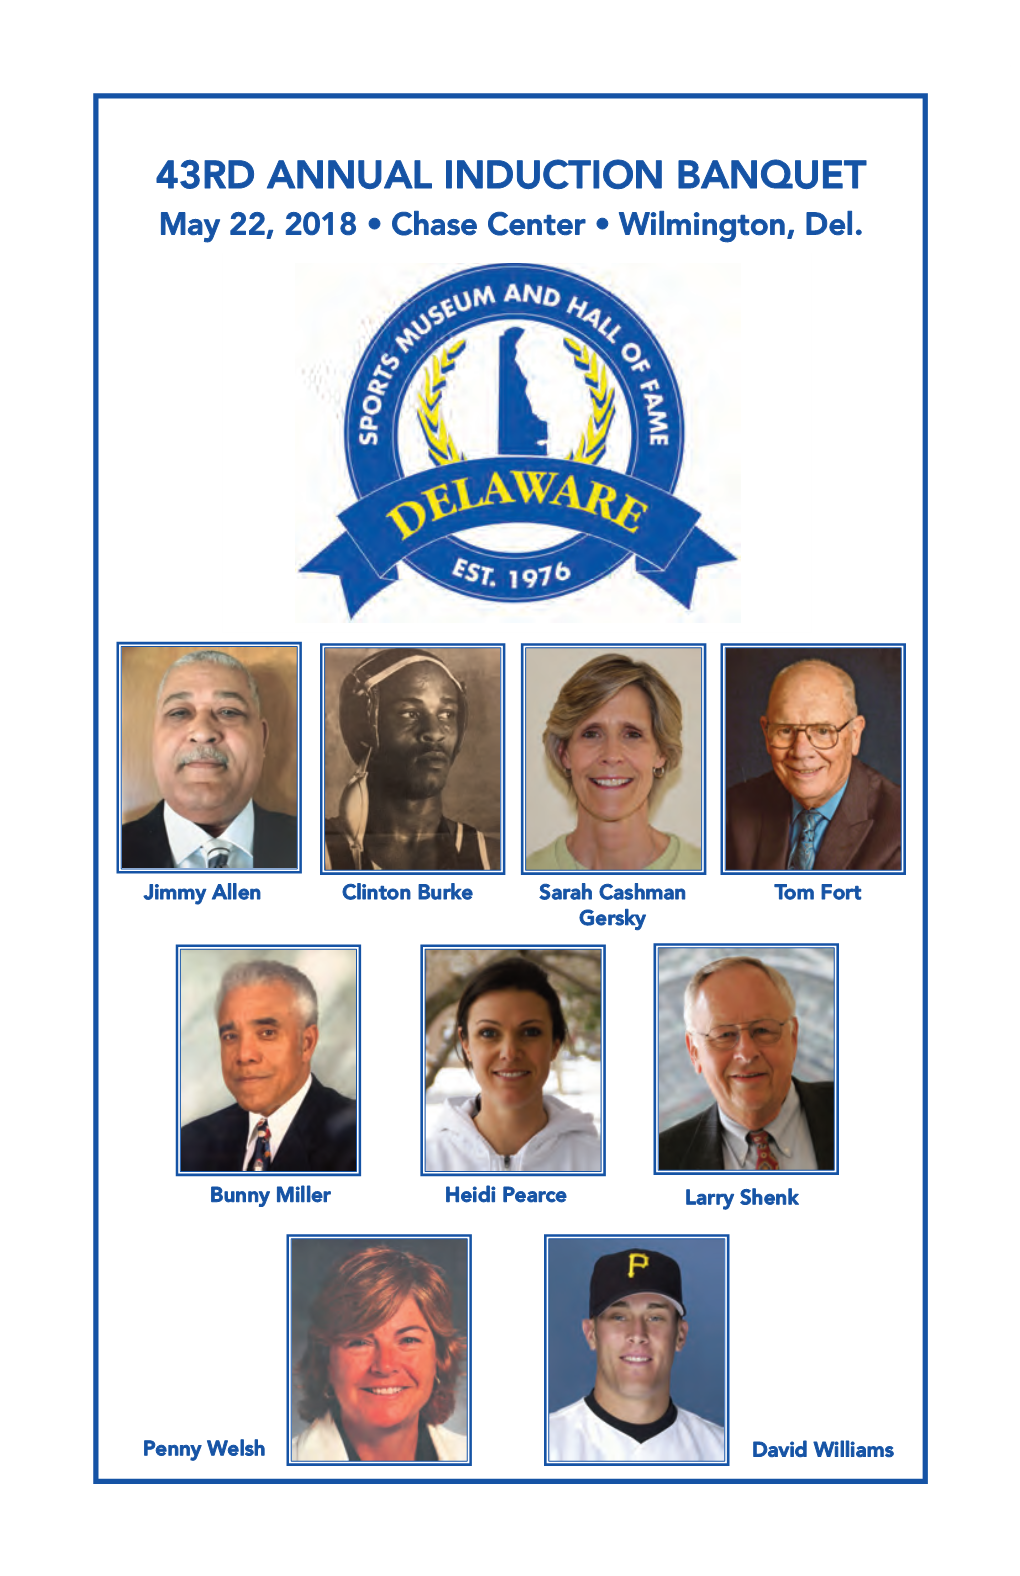 43RD ANNUAL INDUCTION BANQUET May 22, 2018 • Chase Center • Wilmington, Del